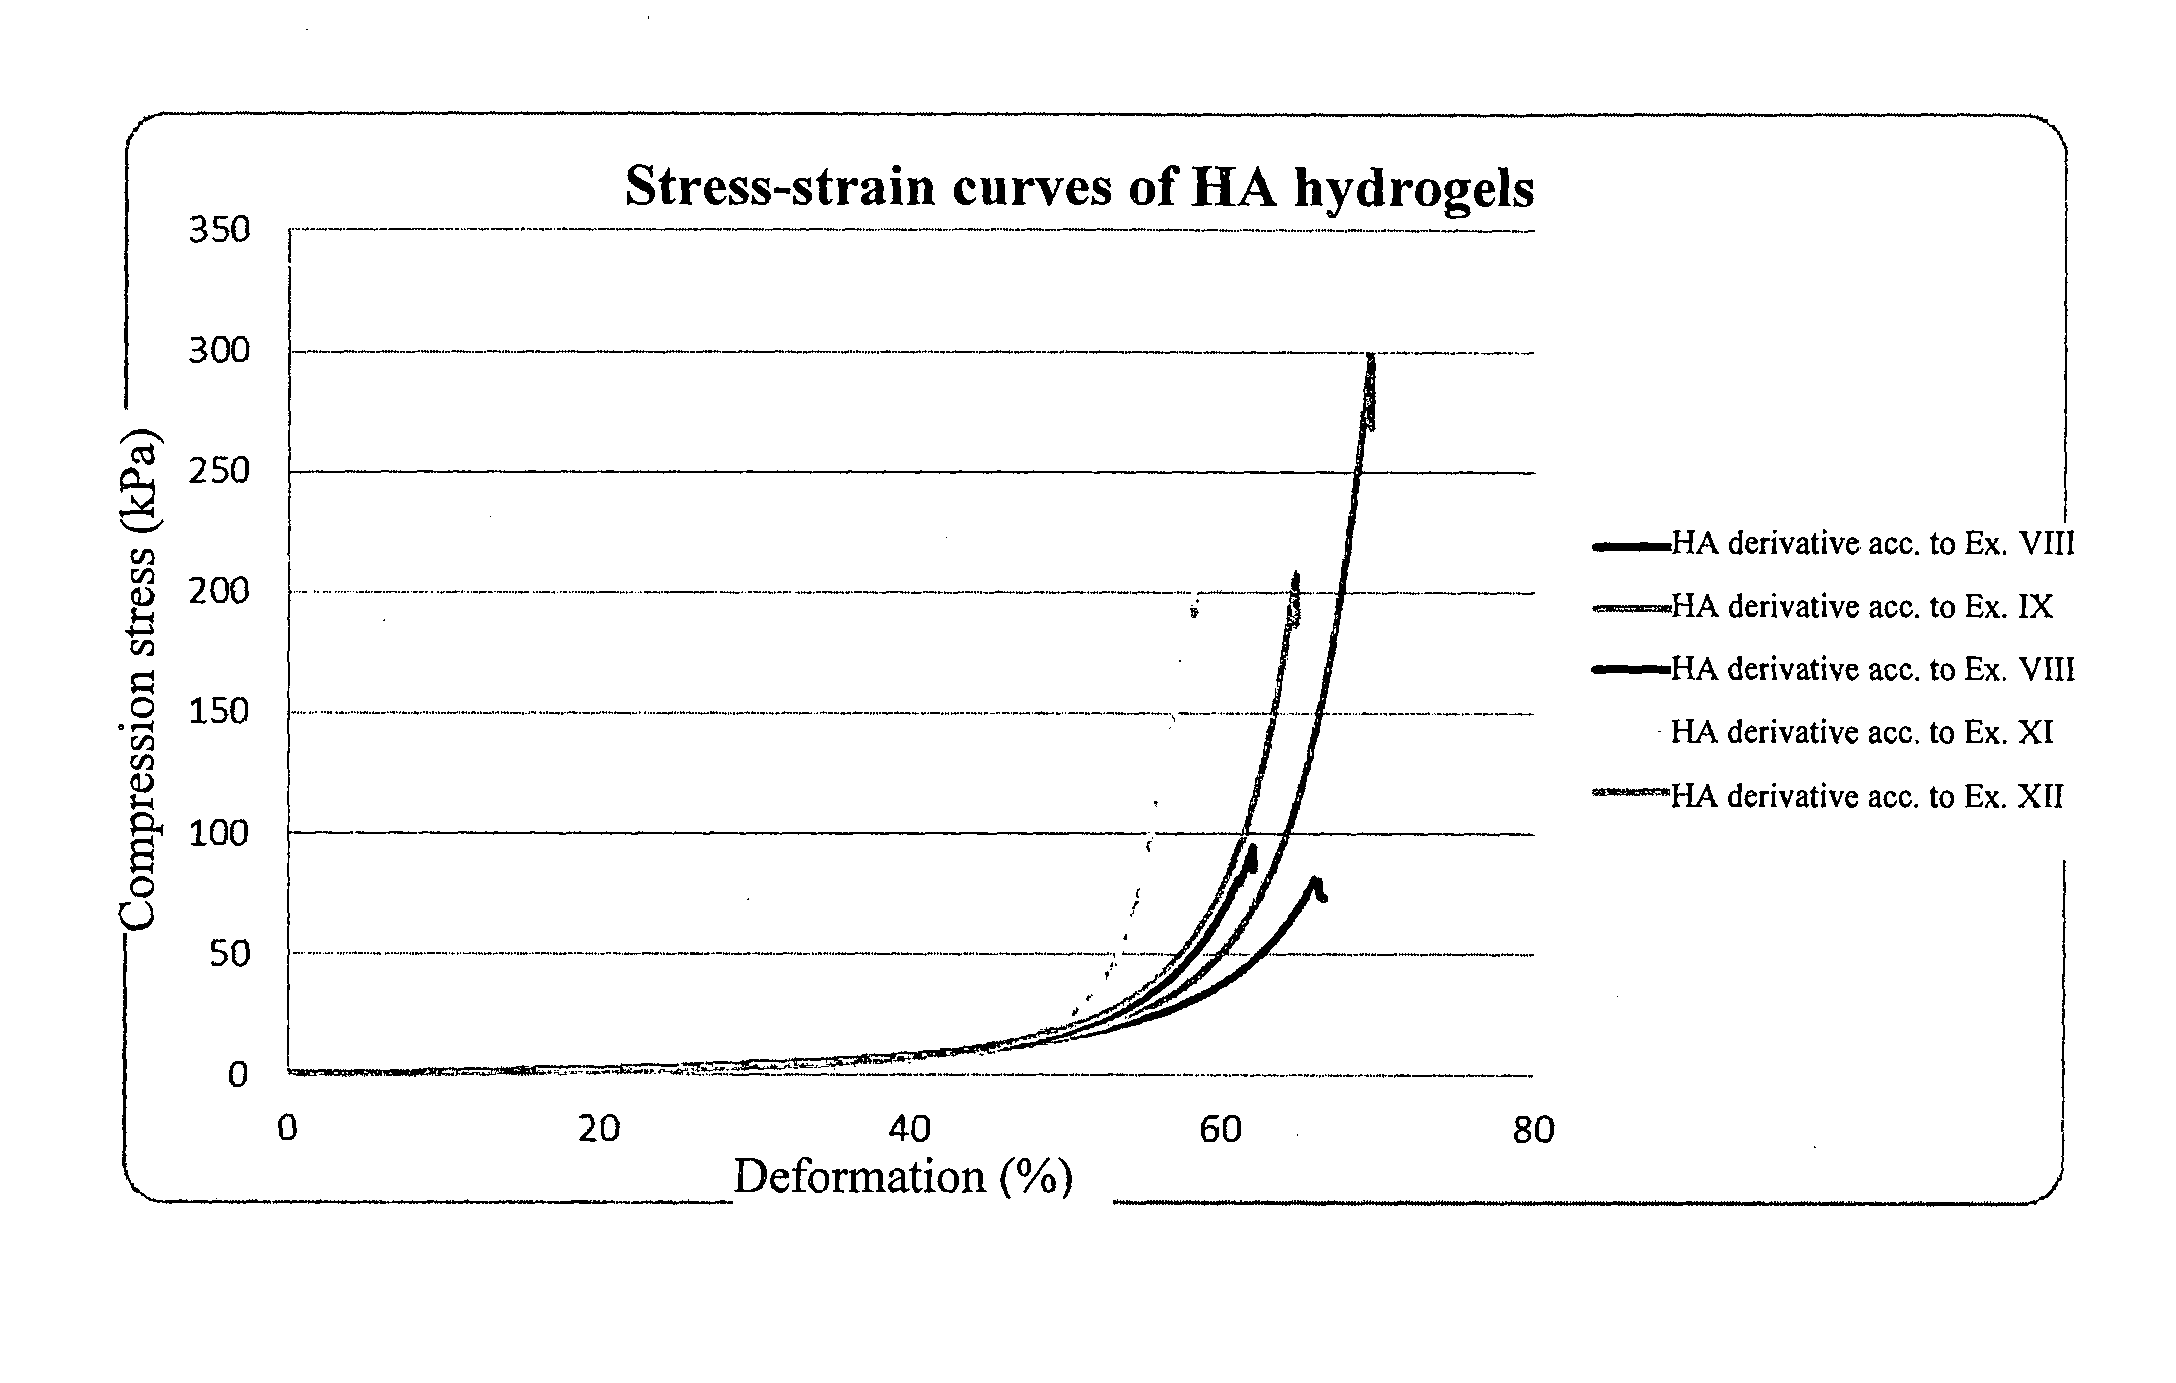 Derivatives of hyaluronic acid capable of forming hydrogels